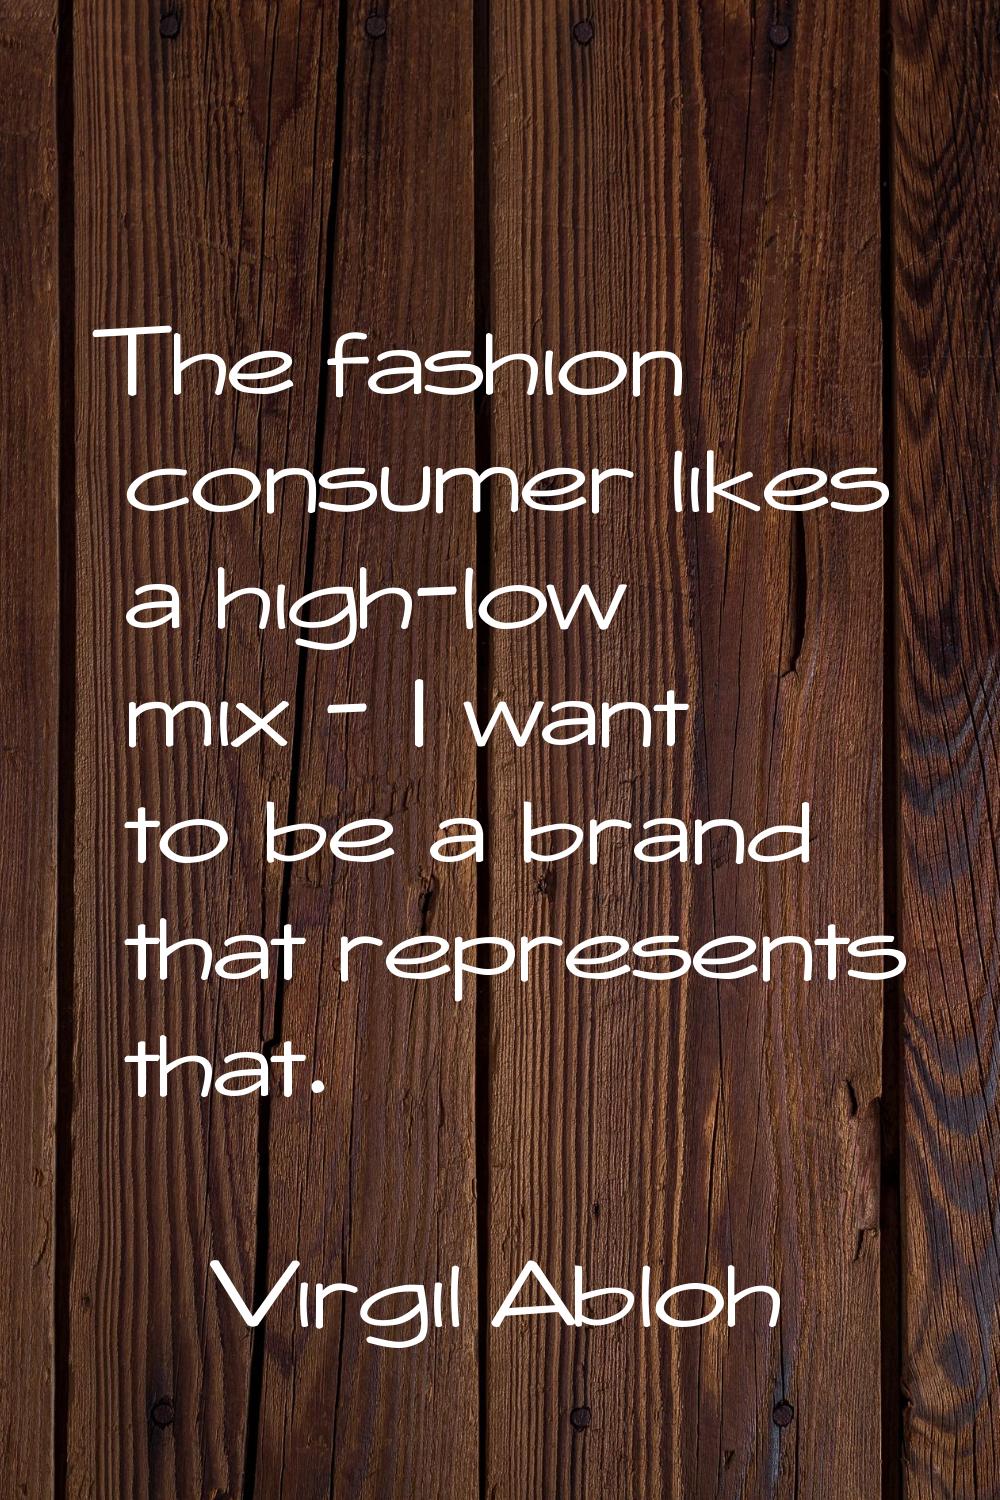 The fashion consumer likes a high-low mix - I want to be a brand that represents that.